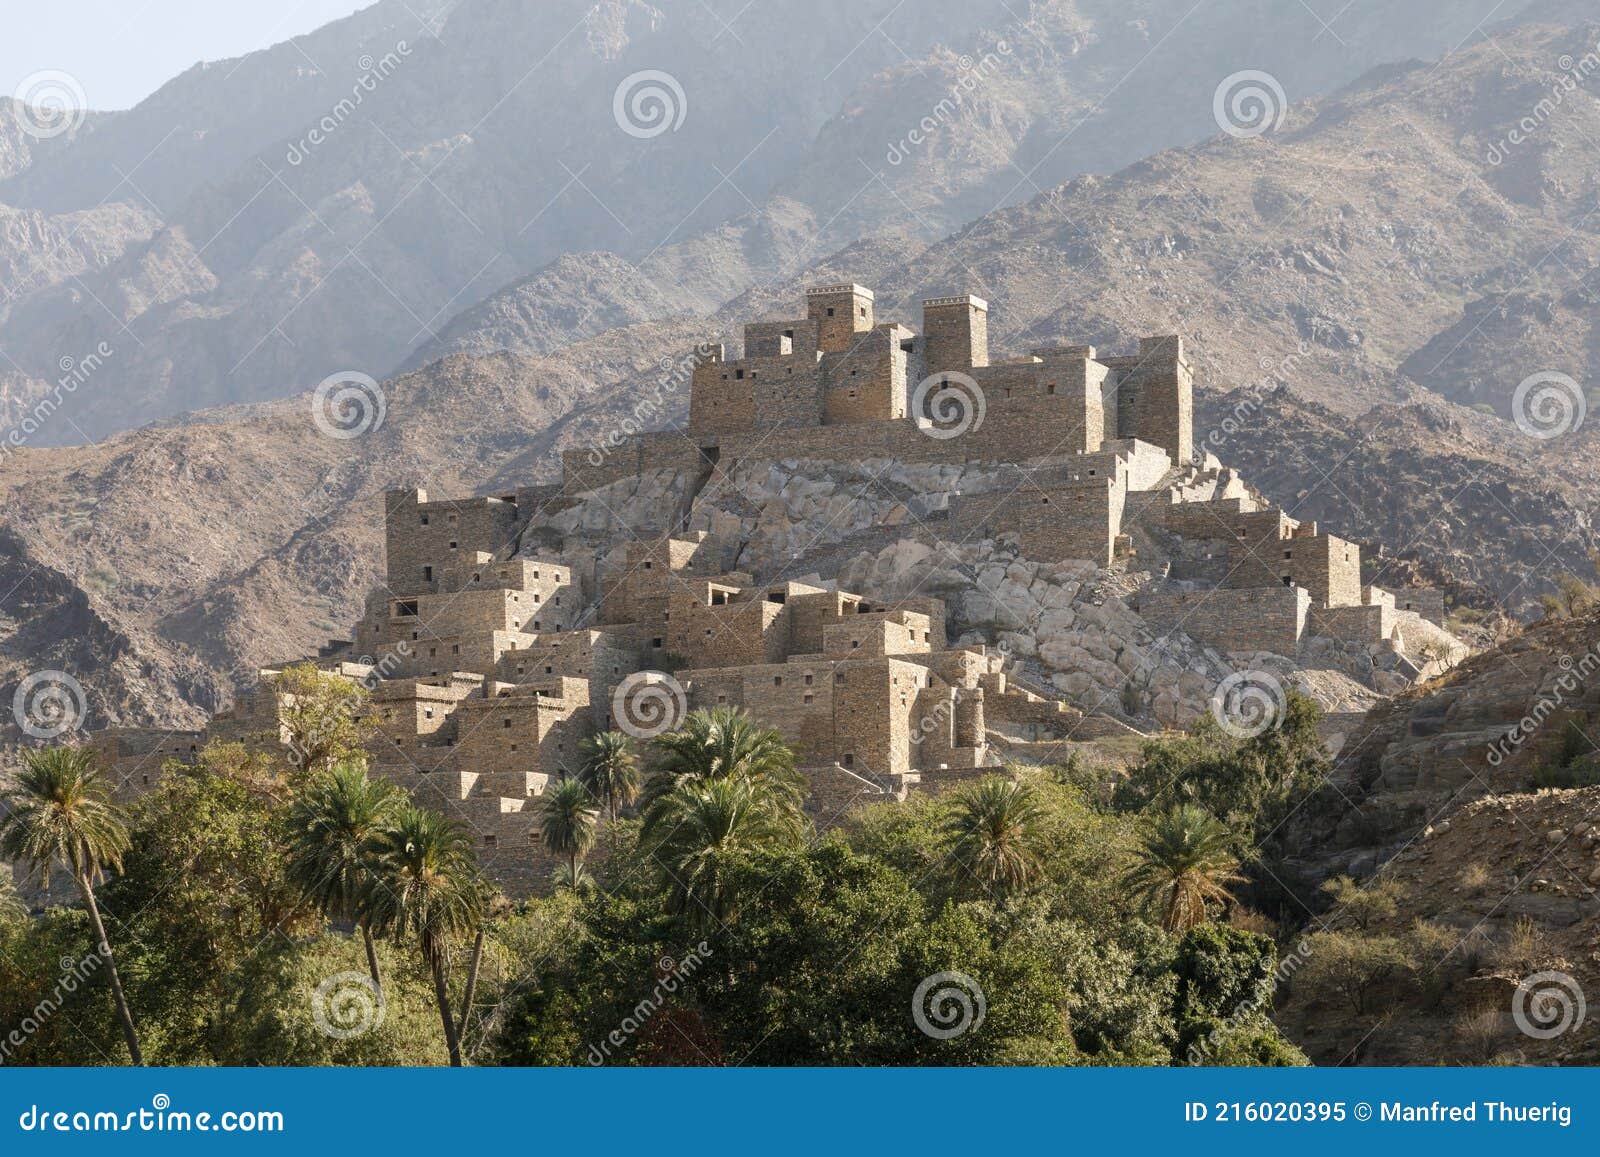 the village of thee ain in al-baha, saudi arabia is a unique heritage site that includes old archaeological buildings